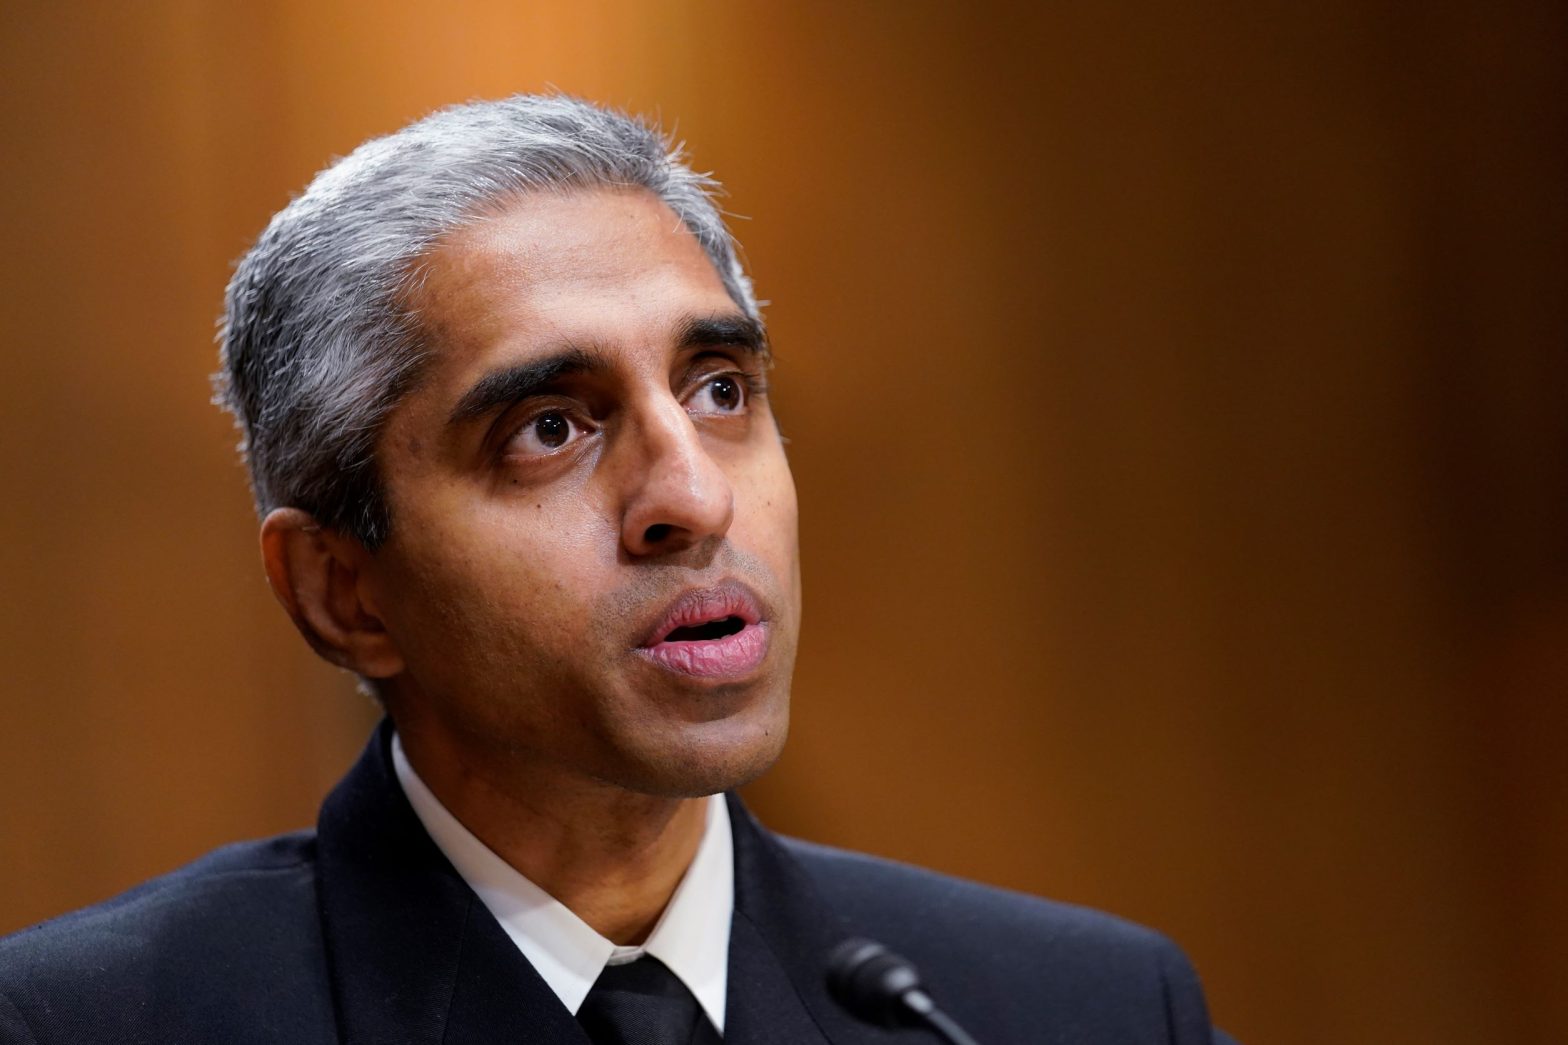 Surgeon General Warns Social Media Poses ‘Profound Risk’ to Young People